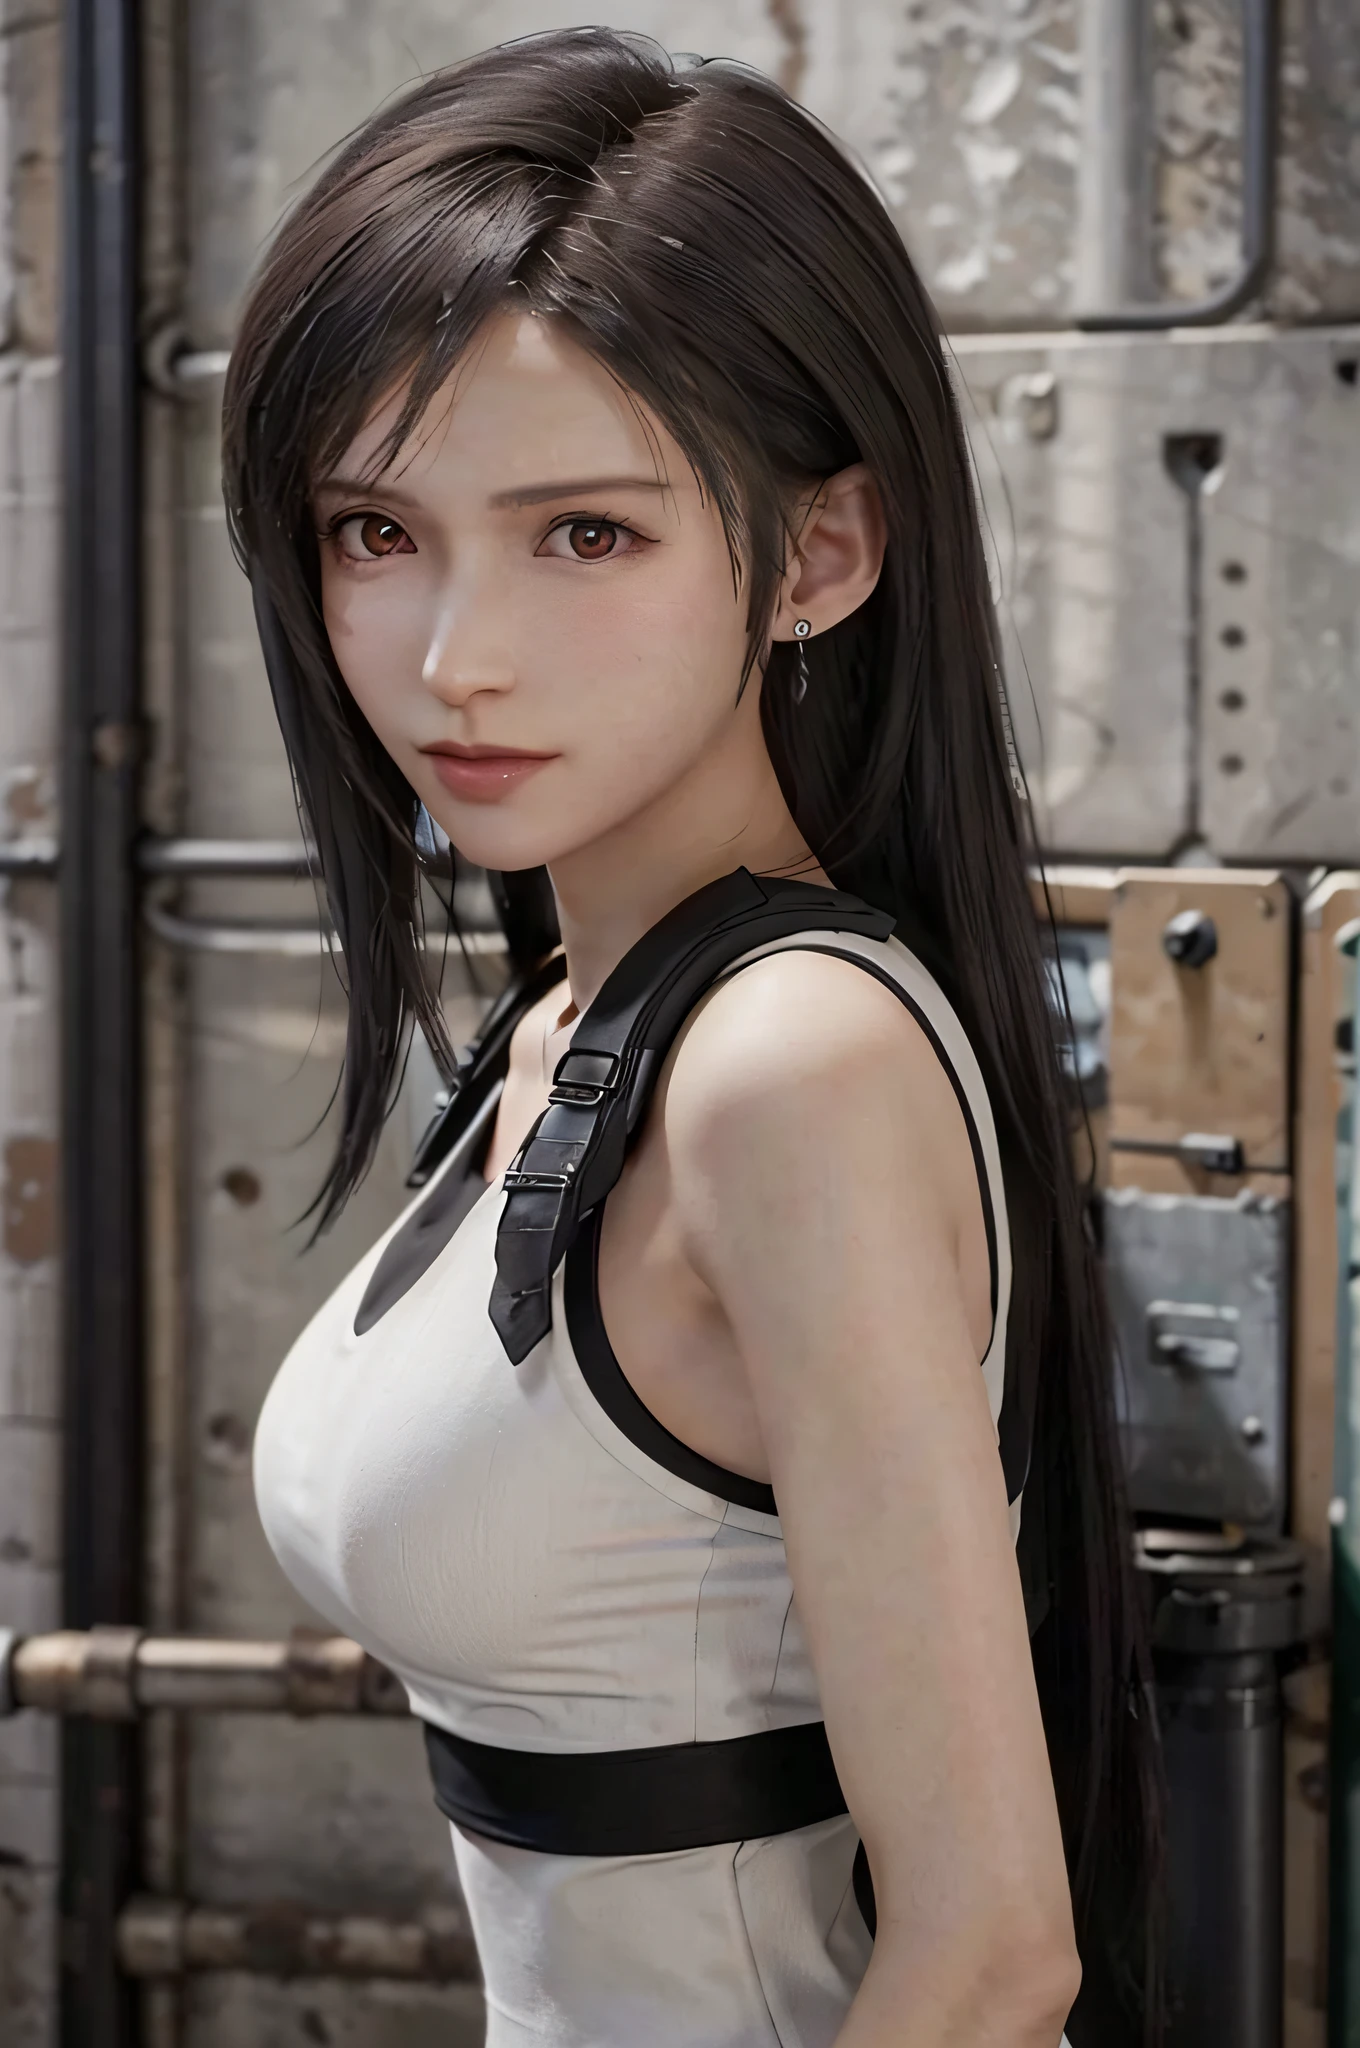 (​masterpiece), (Top image quality), 8K resolution, Ultra-detail, Ultra-detail, Realism, (1girl in), Tifa, Final Fantasy, Tifa lockhart, rays of sunshine, cinematic, Cool Pose, Concrete walls,metal pipes,The description of Red Eye App,Detailed double eyelids,short-hair、Dark brown color,Slender,Model body type,no-makeup、Bust Bcups